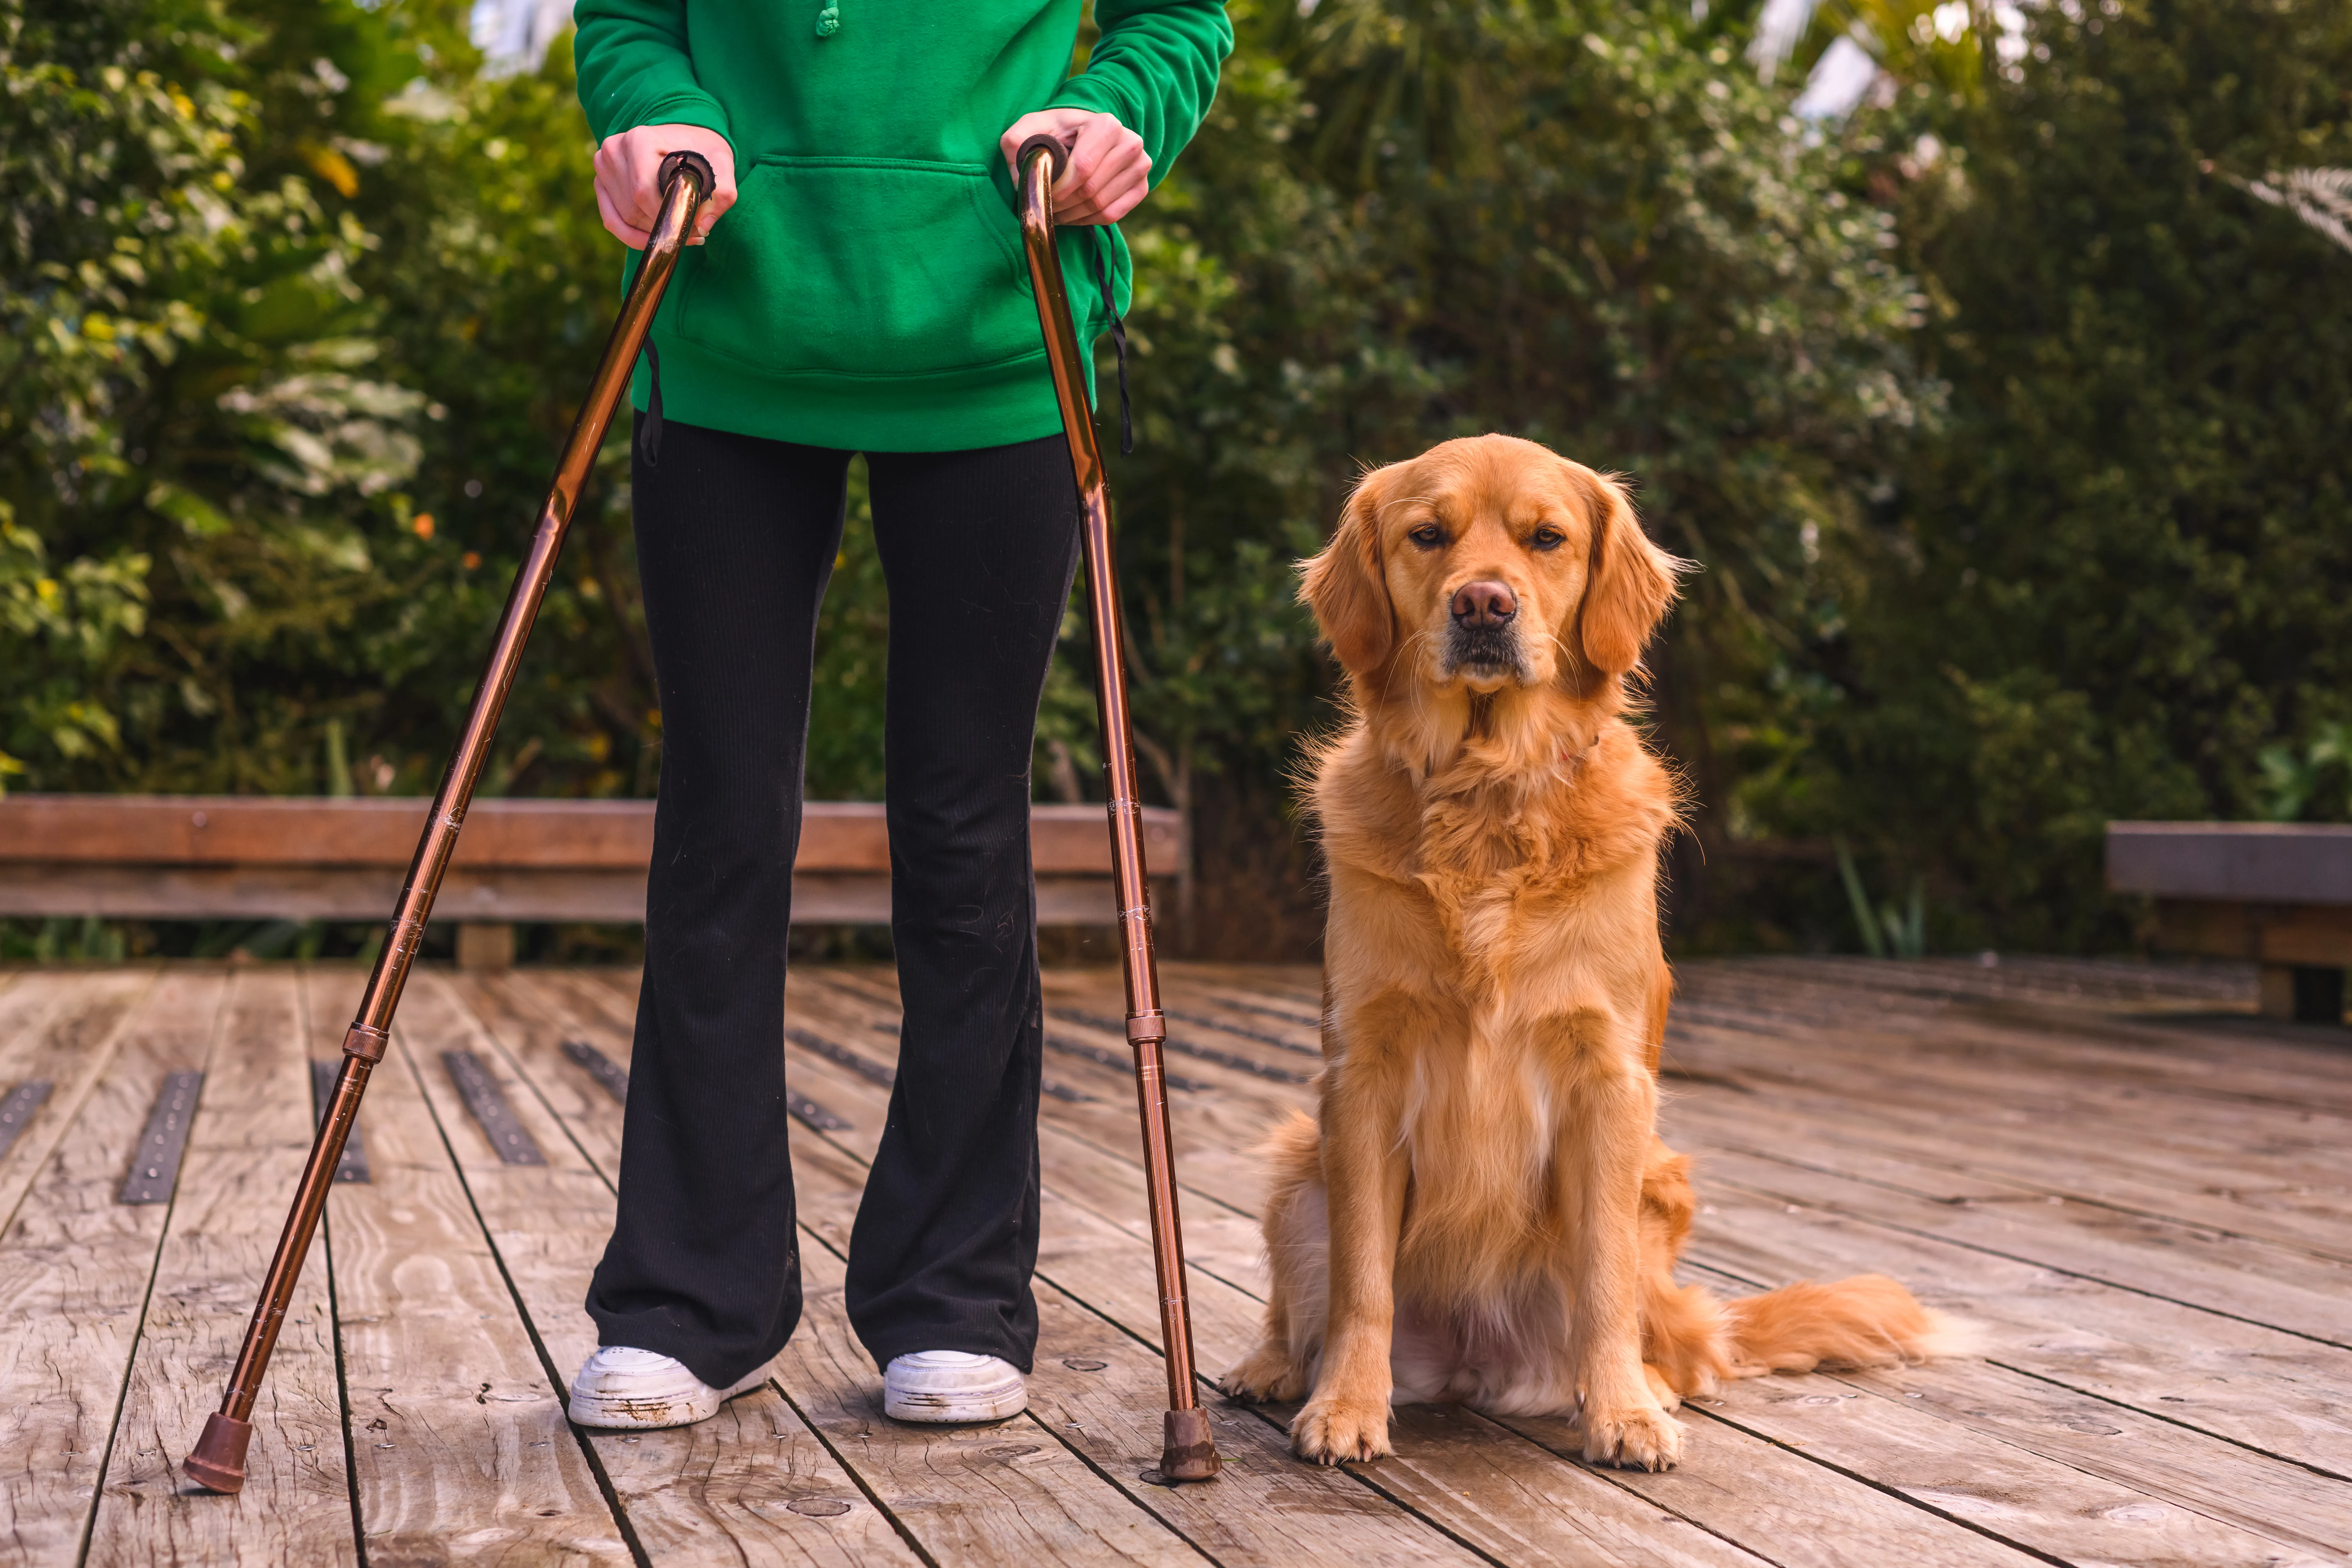 The image shows a person standing using crutches outdoors with a dog. The dog is a Mobility Dog. They are standing near some trees on the ground.